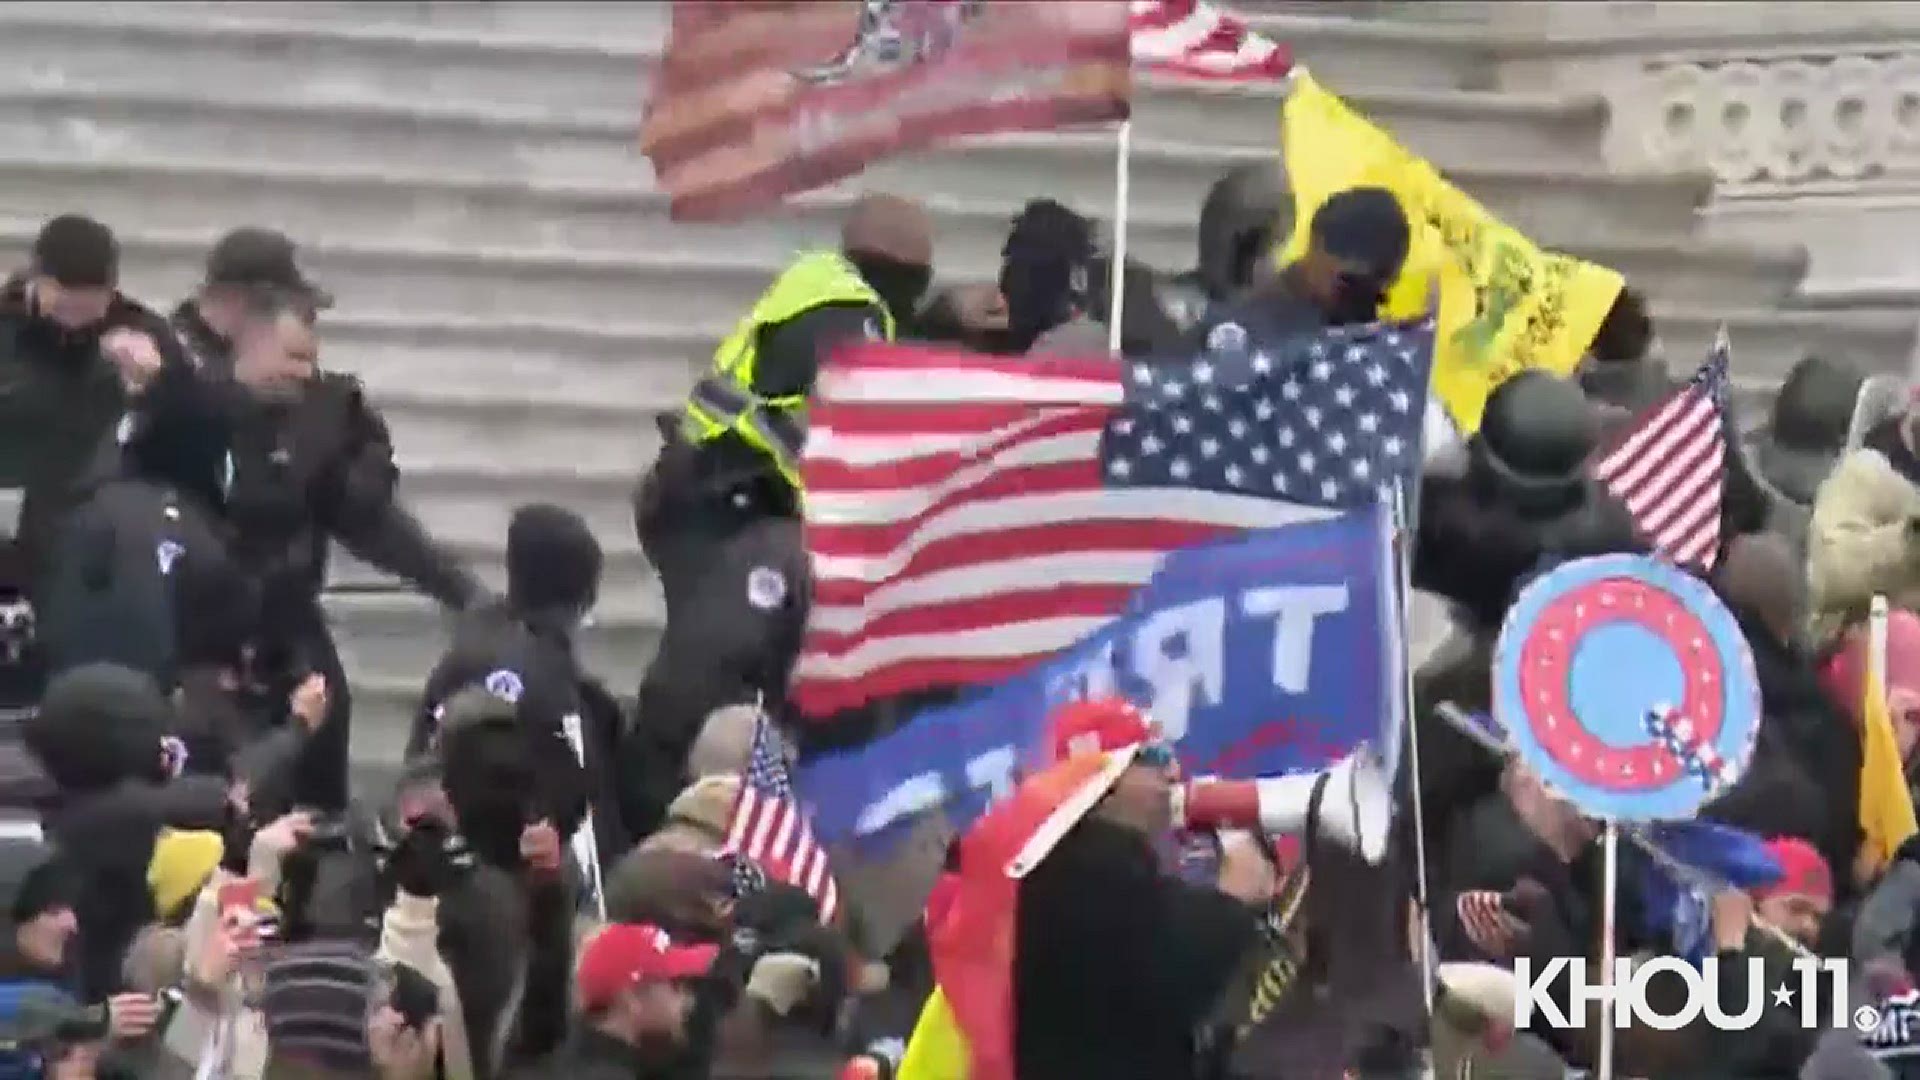 Thousands of Trump supporters break through police barricades and storm U.S. Capitol. The building is now on lockdown.